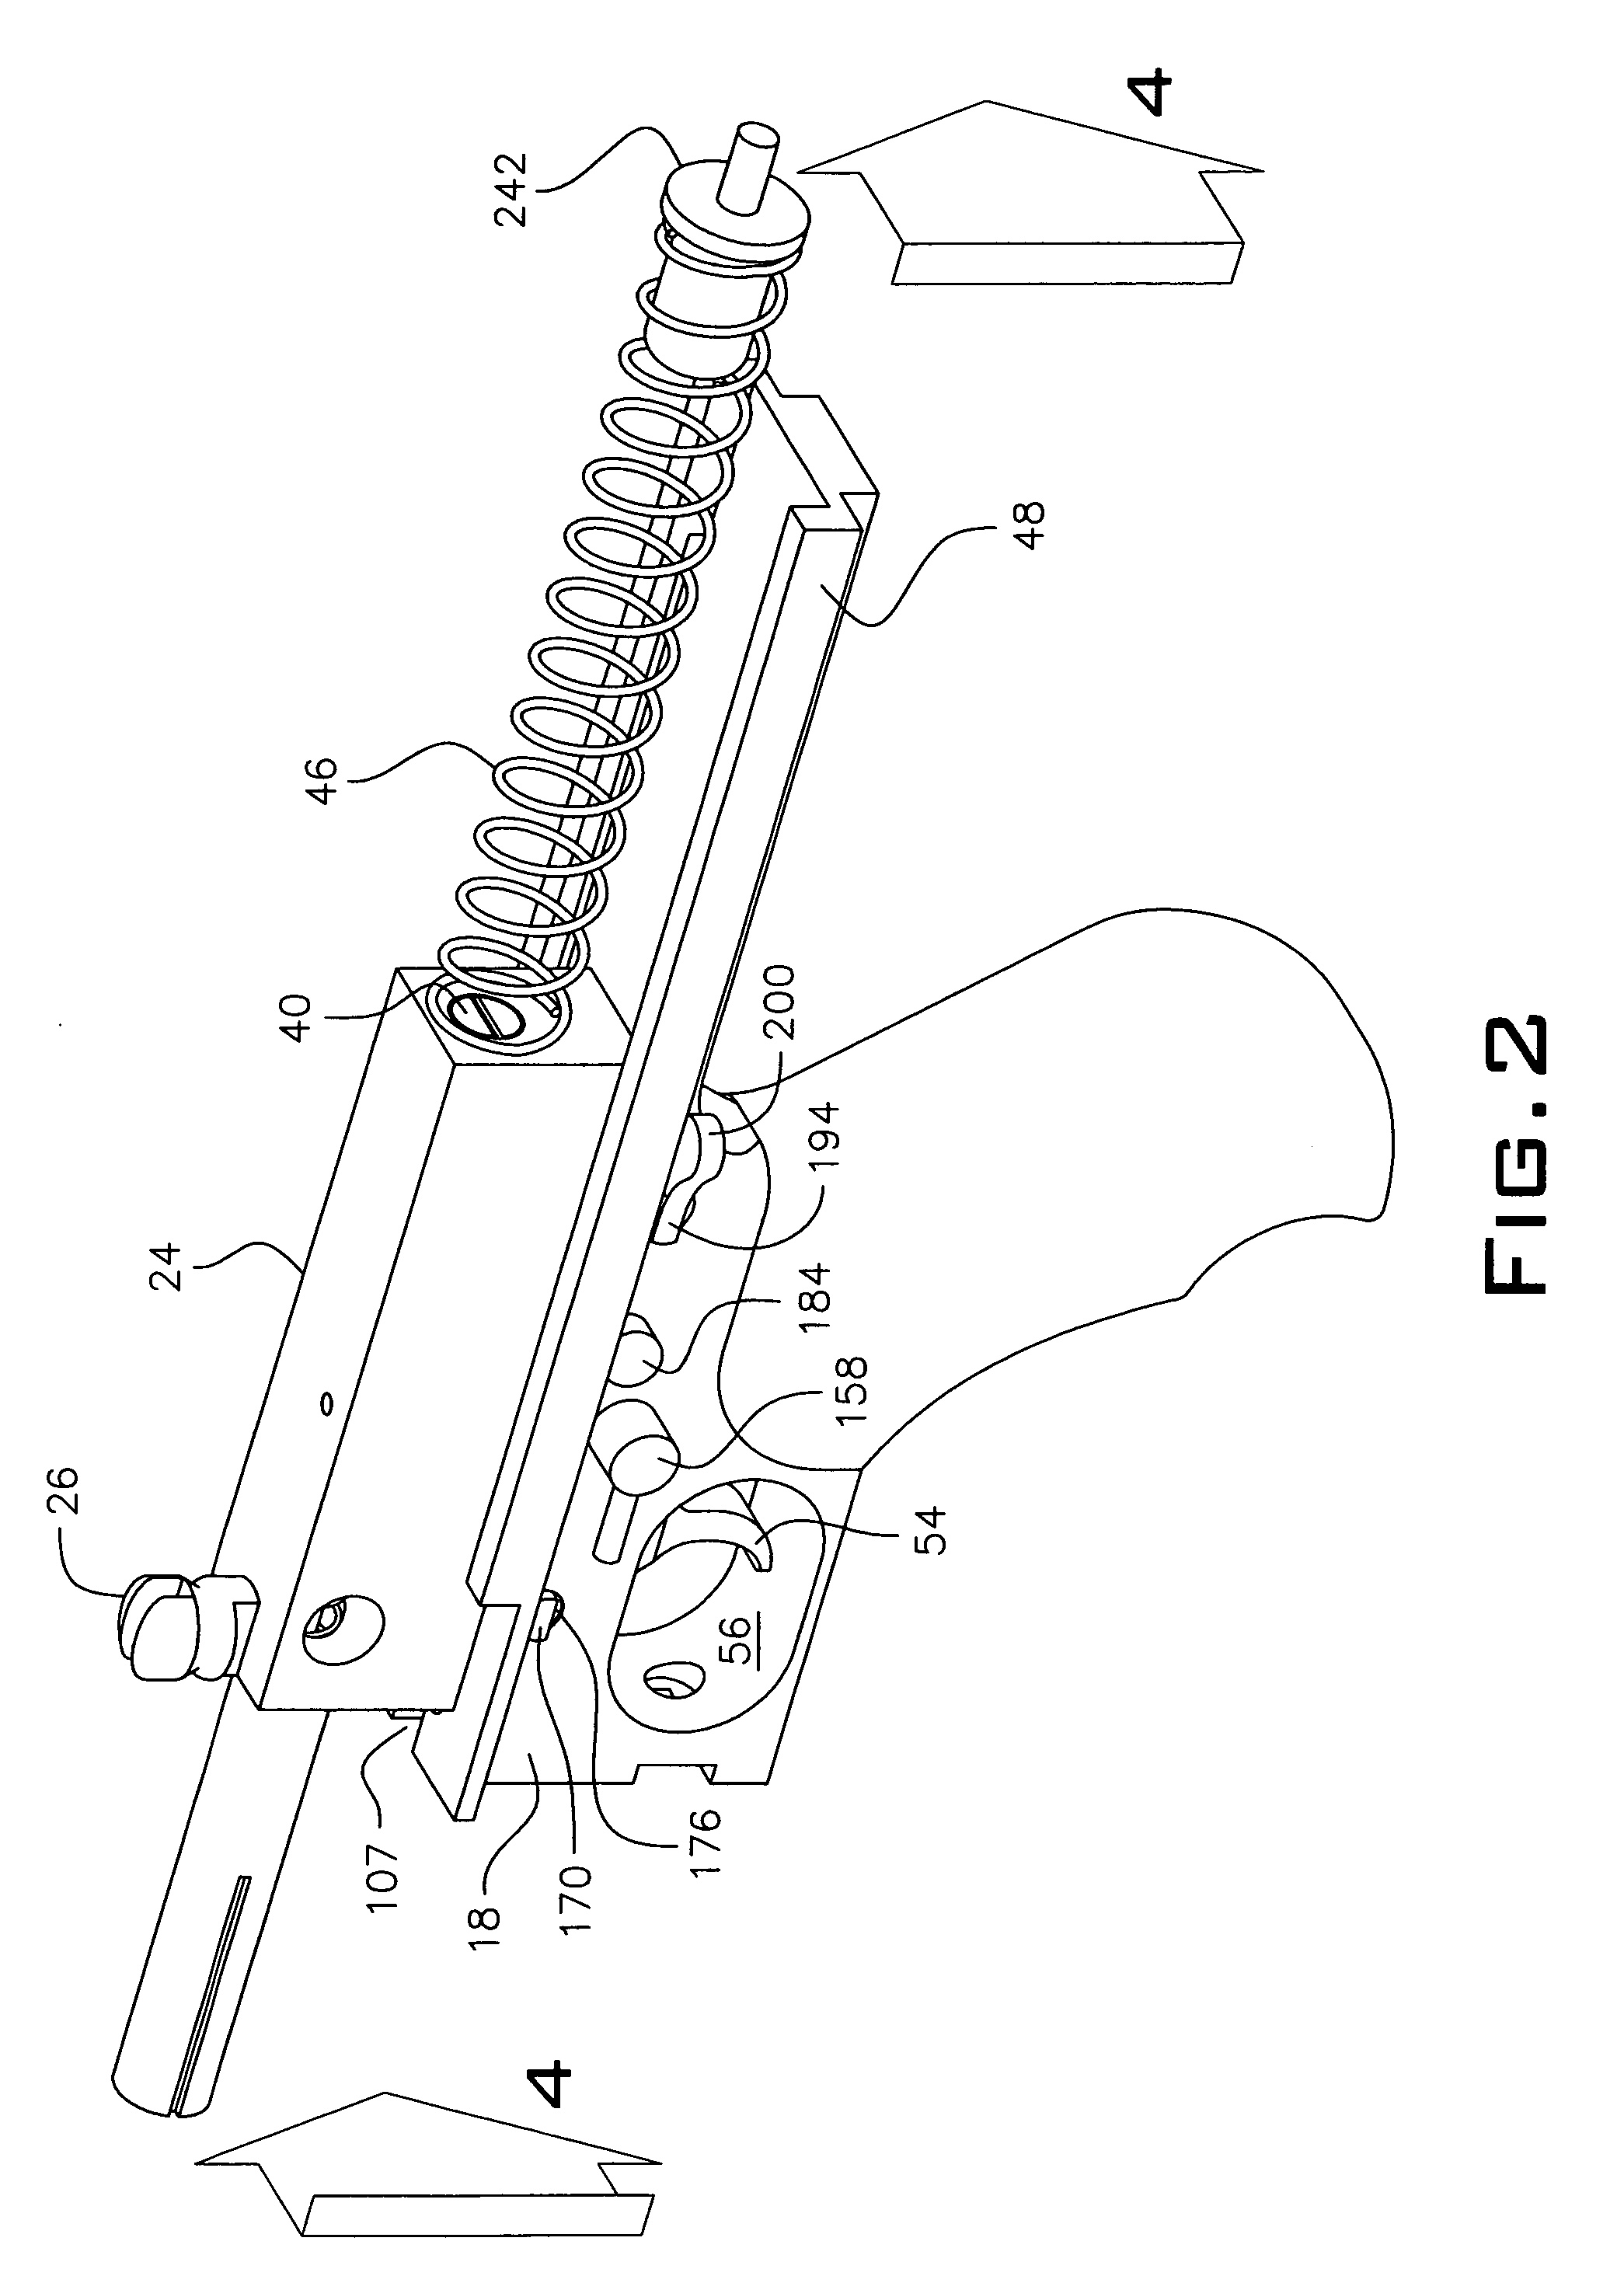 Closed bolt system with tigger assembly for converting afully automatic submachine gun into a semi-automatic carbine